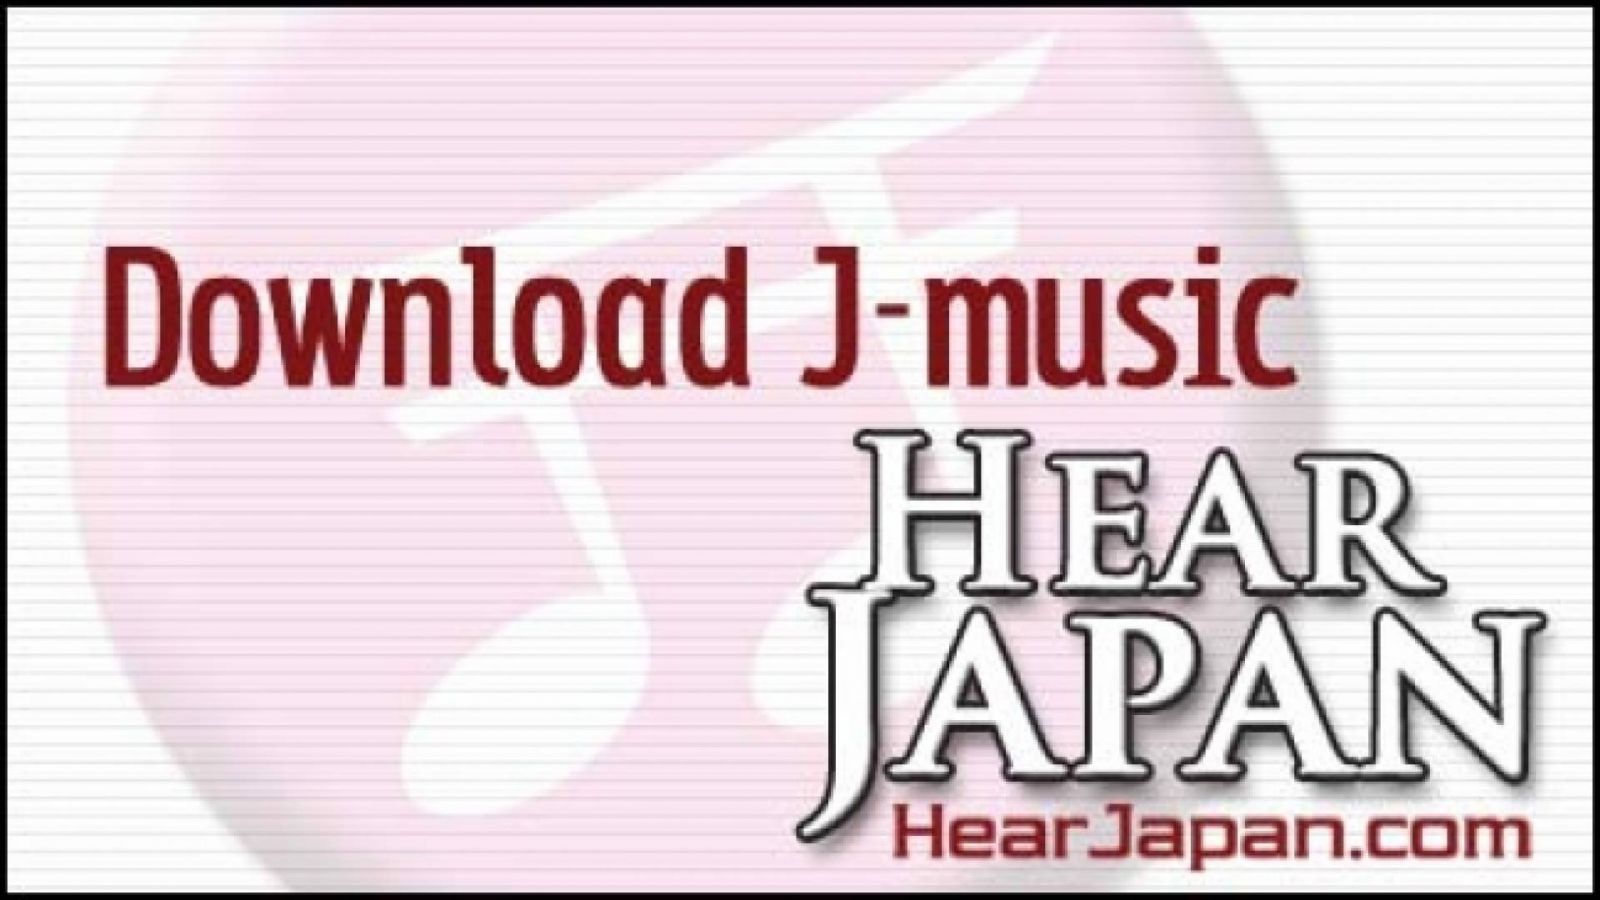 HearJapan Partnership and Contest © HearJapan